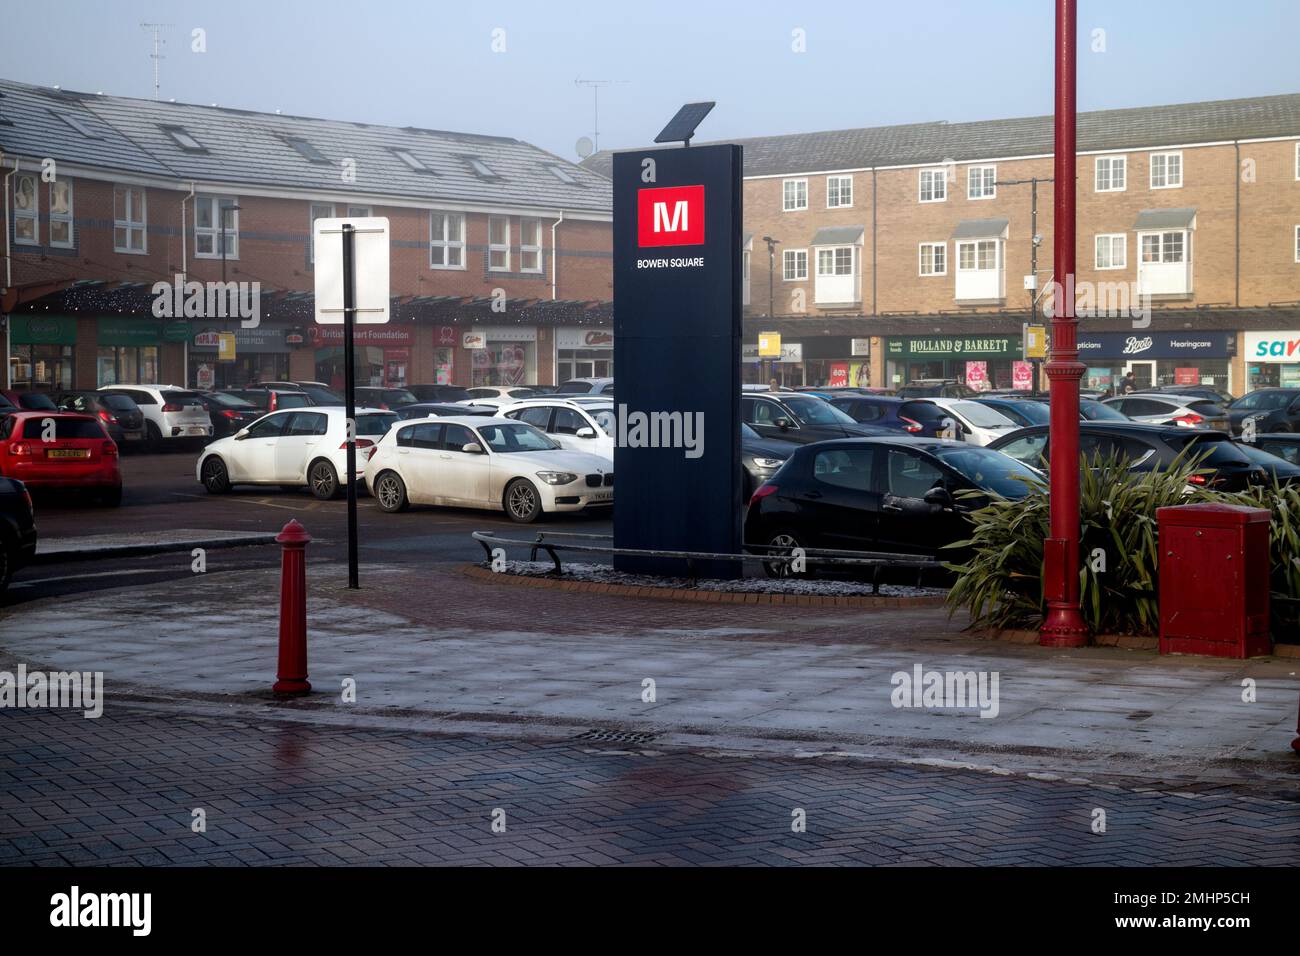 Bowen Square shops and car park in winter, Daventry, Northamptonshire, England, UK Stock Photo